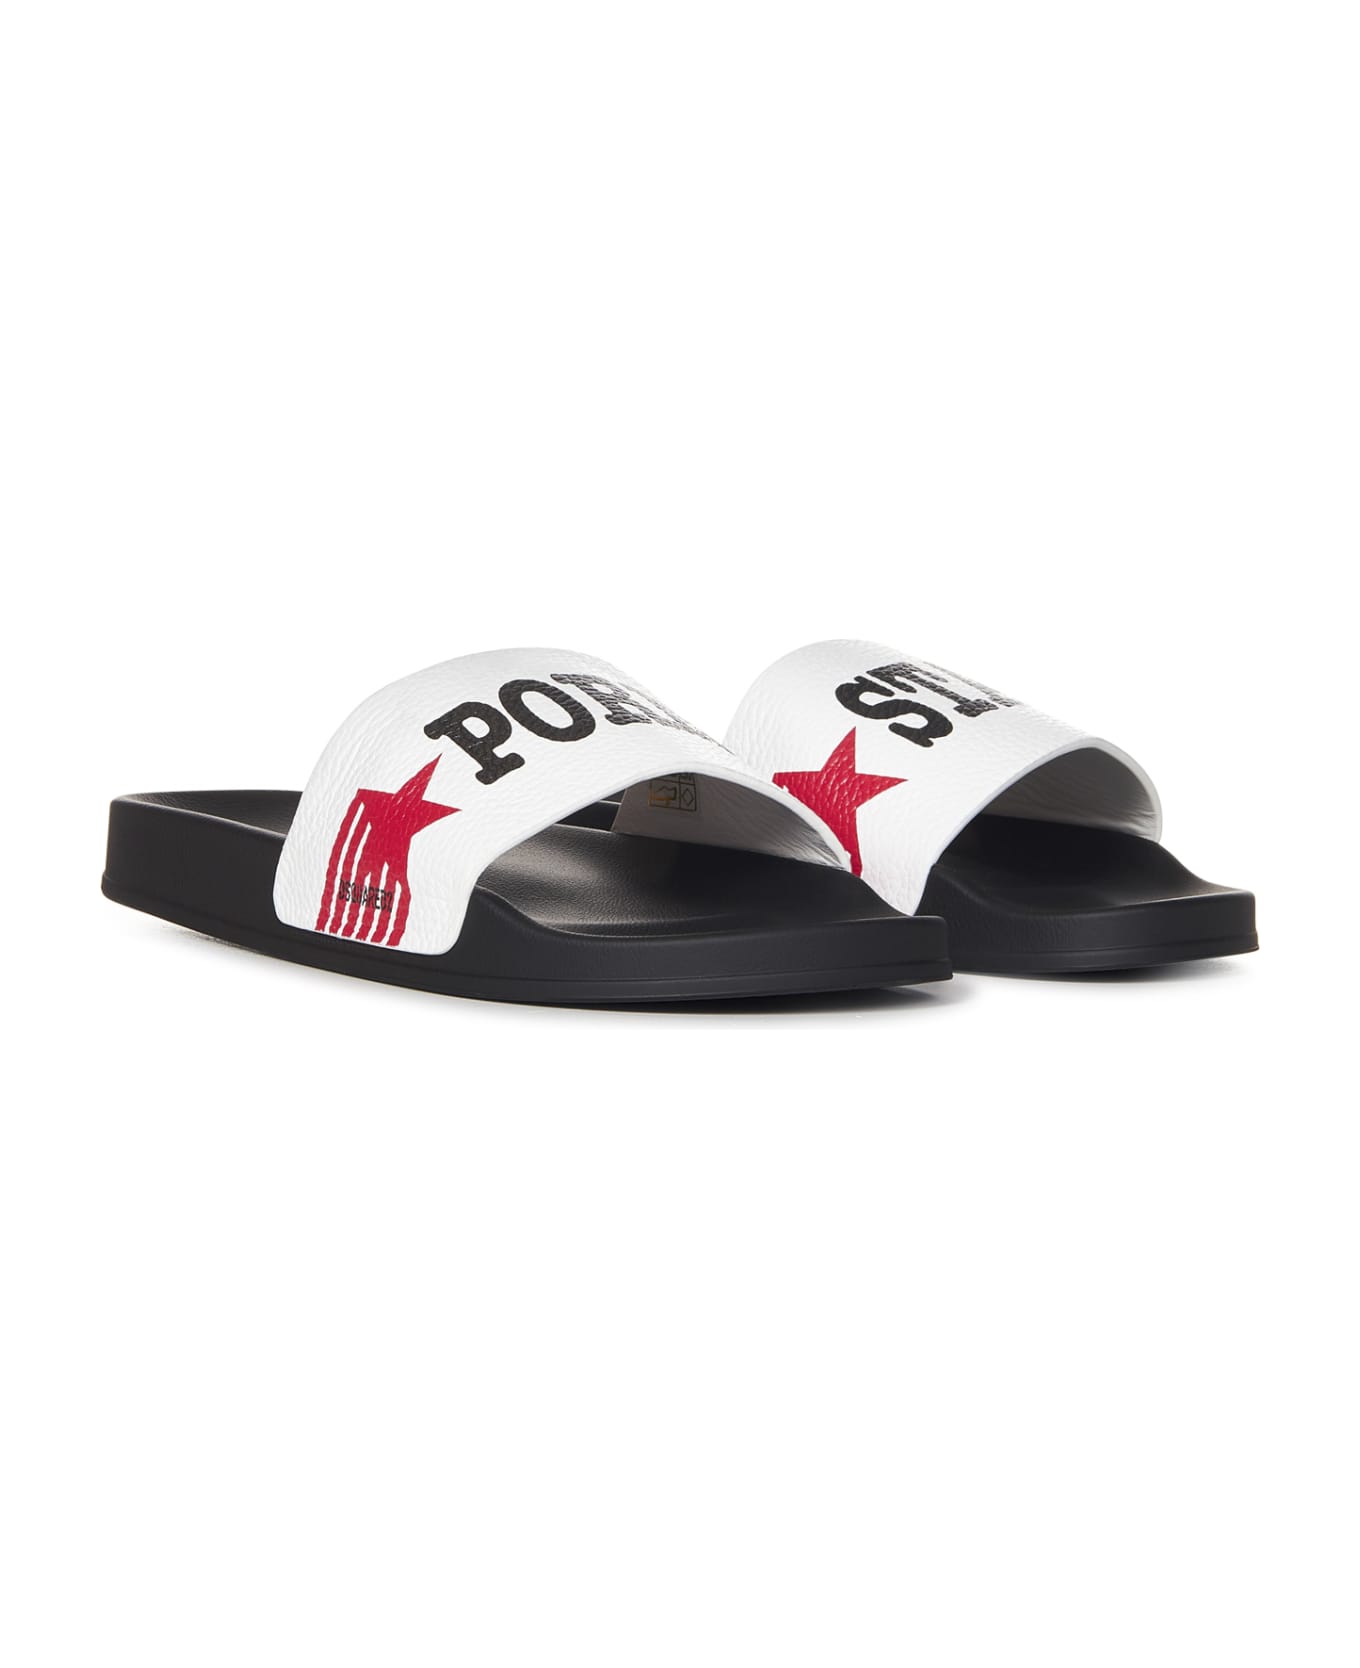 Dsquared2 Rocco Sliders - White その他各種シューズ